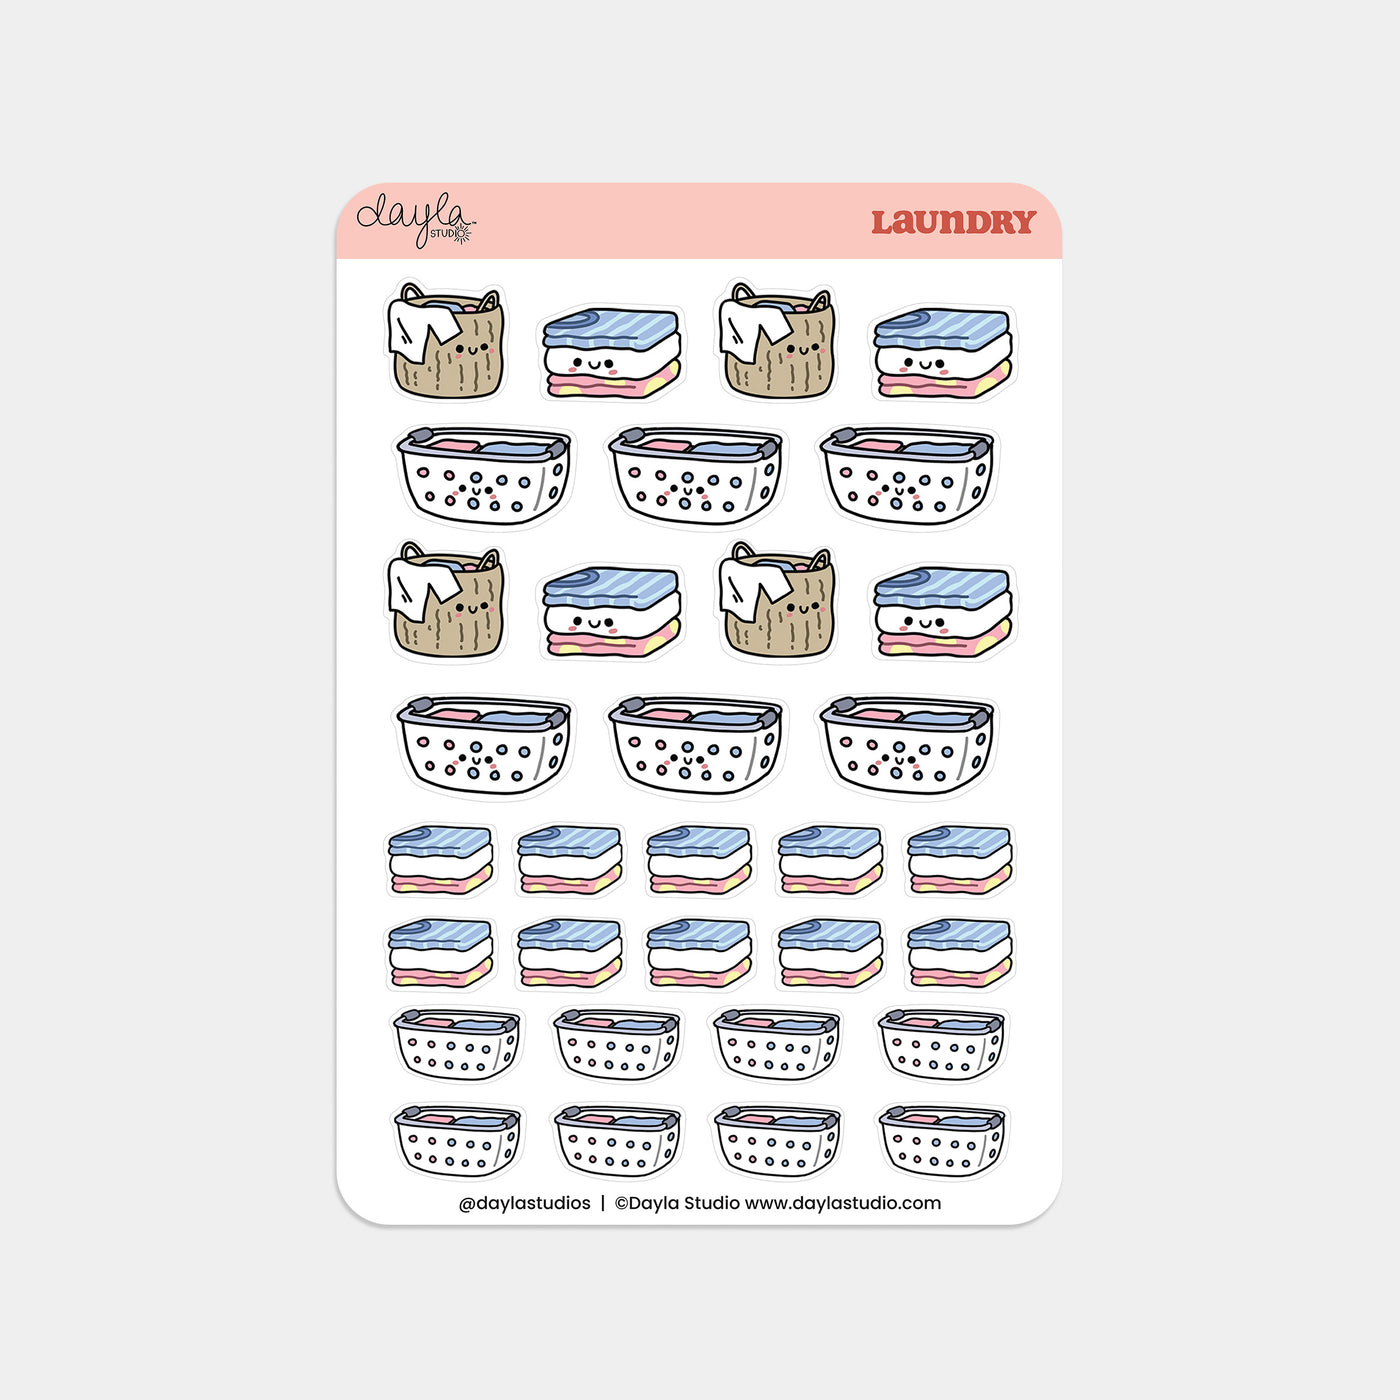 "Laundry" Stickers